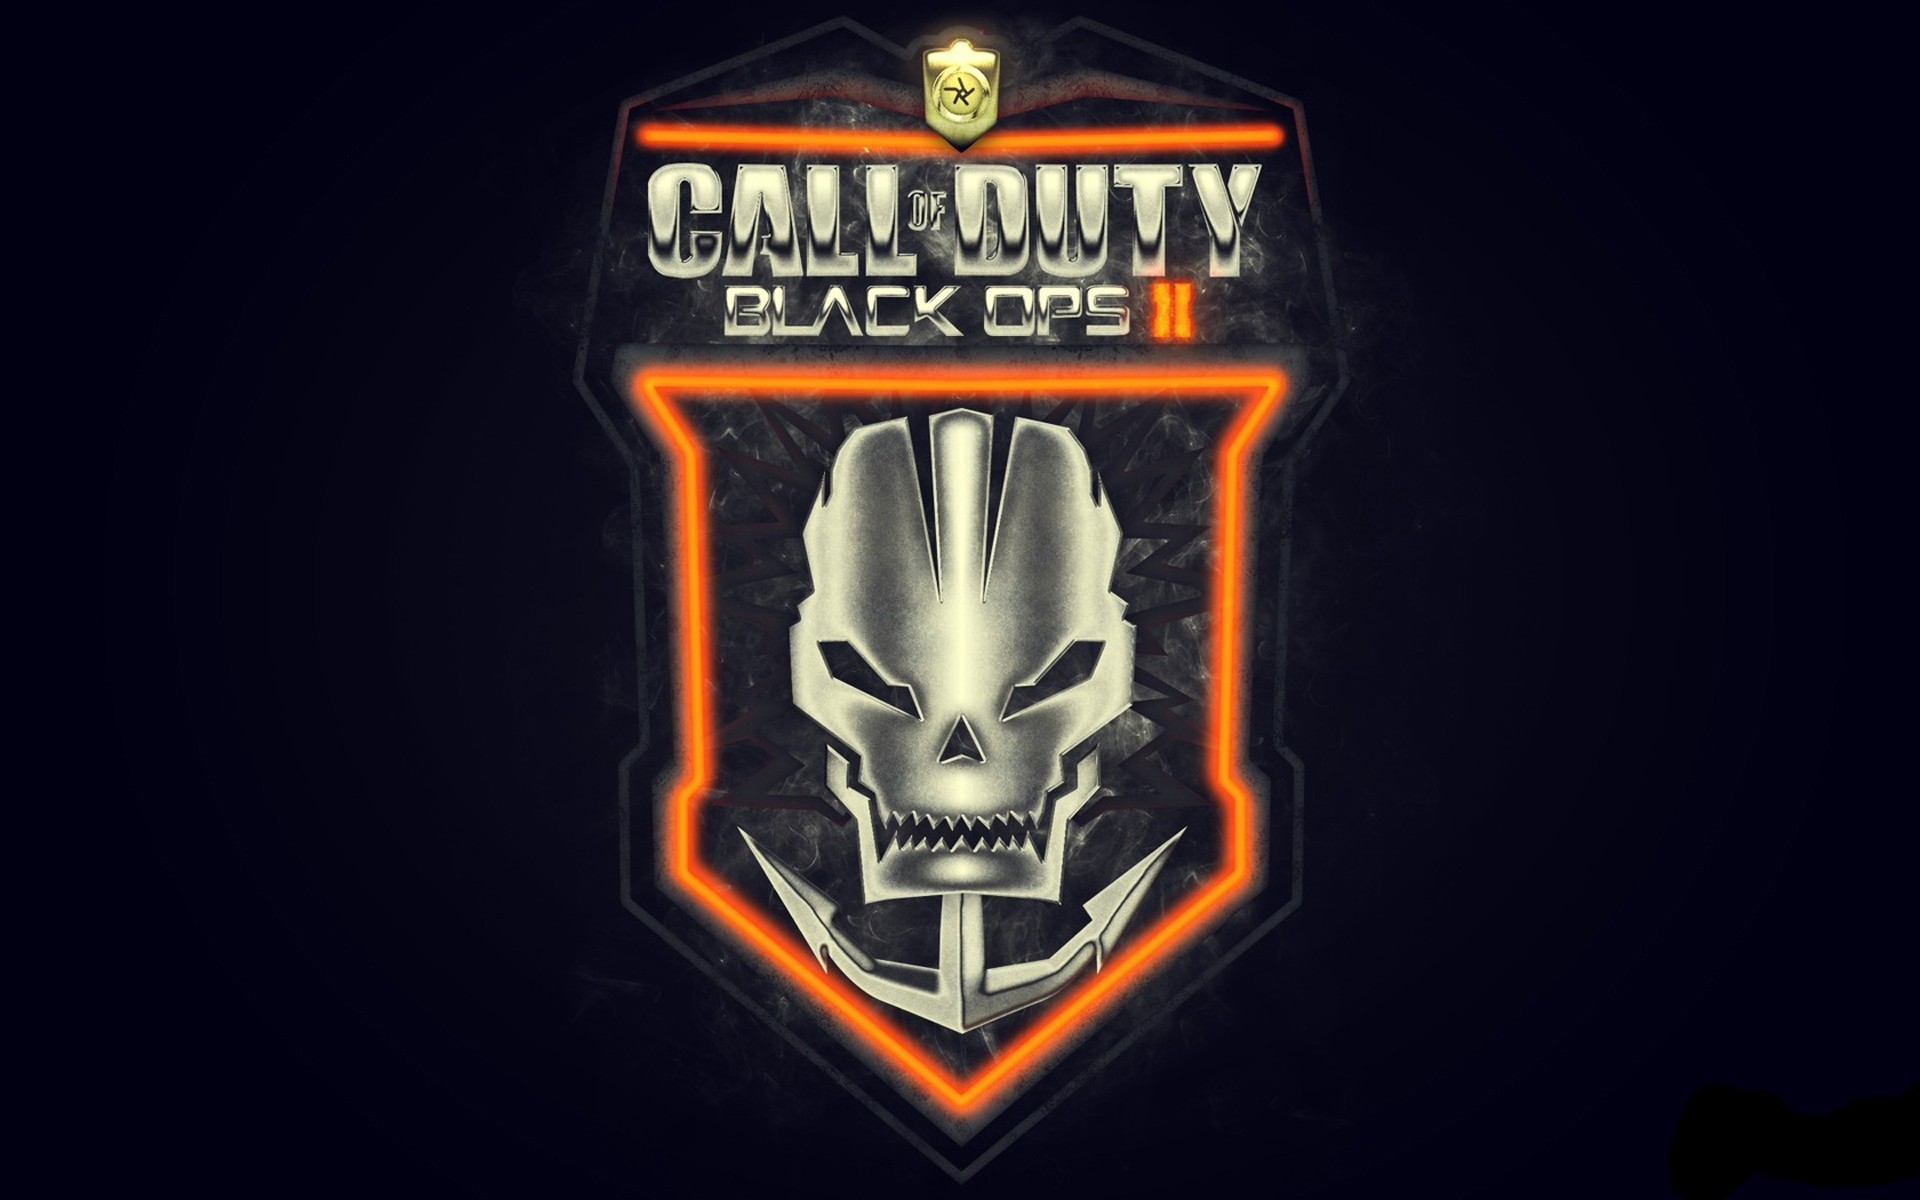 1920x1200 Call Of Duty: Black Ops Wallpaper Pack file - Mod DB | Adorable Wallpapers  | Pinterest | Black ops and Wallpaper